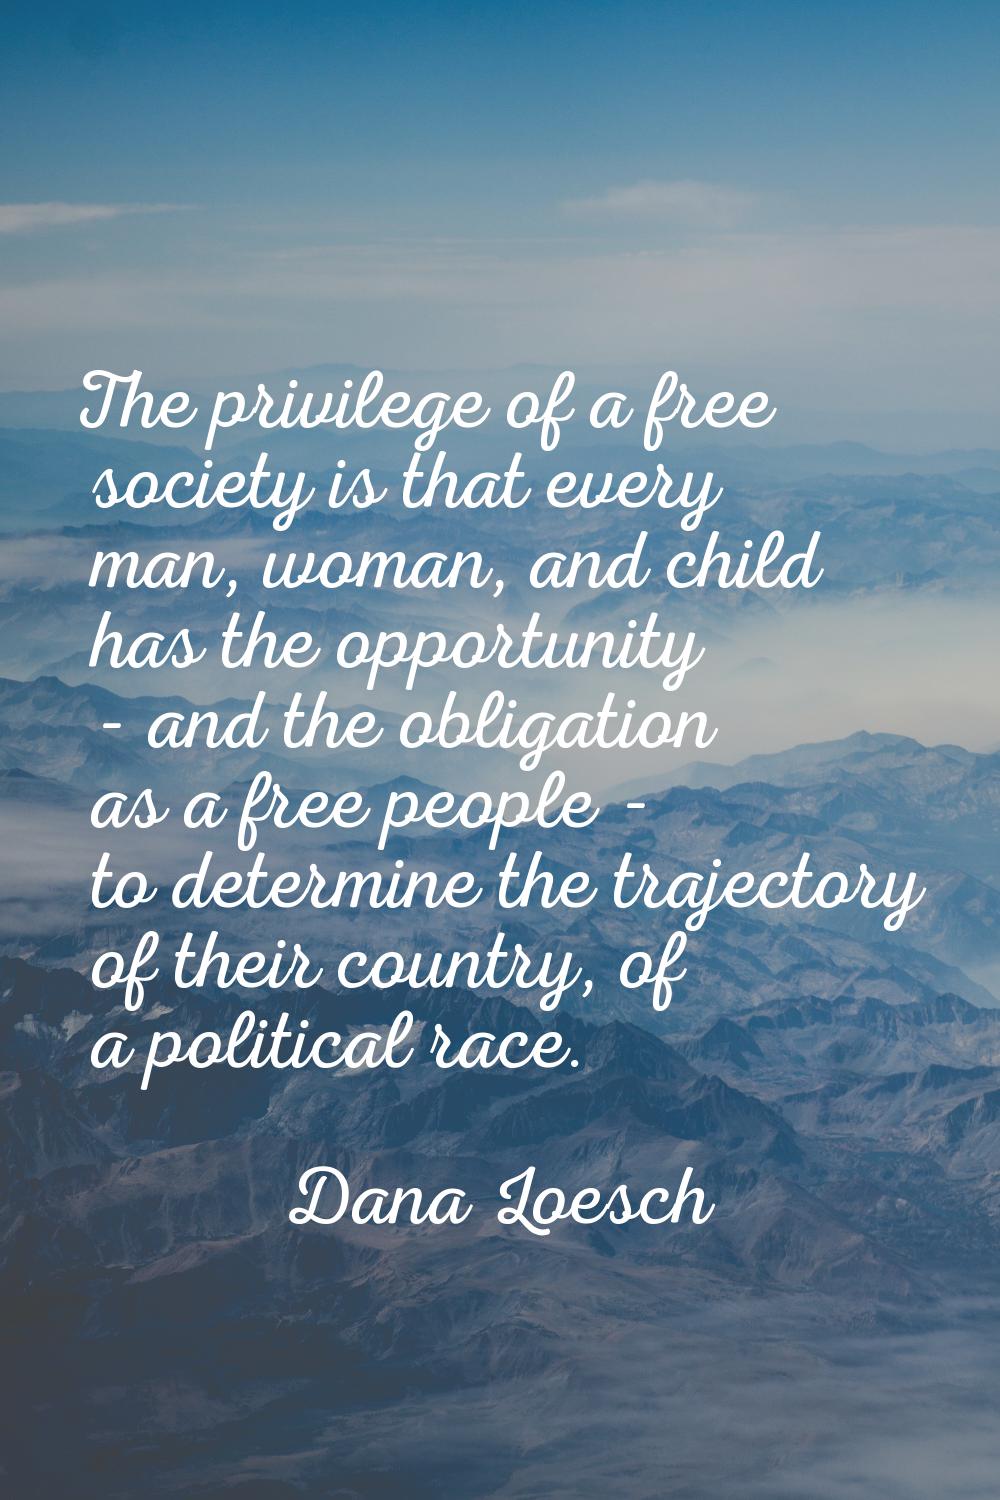 The privilege of a free society is that every man, woman, and child has the opportunity - and the o